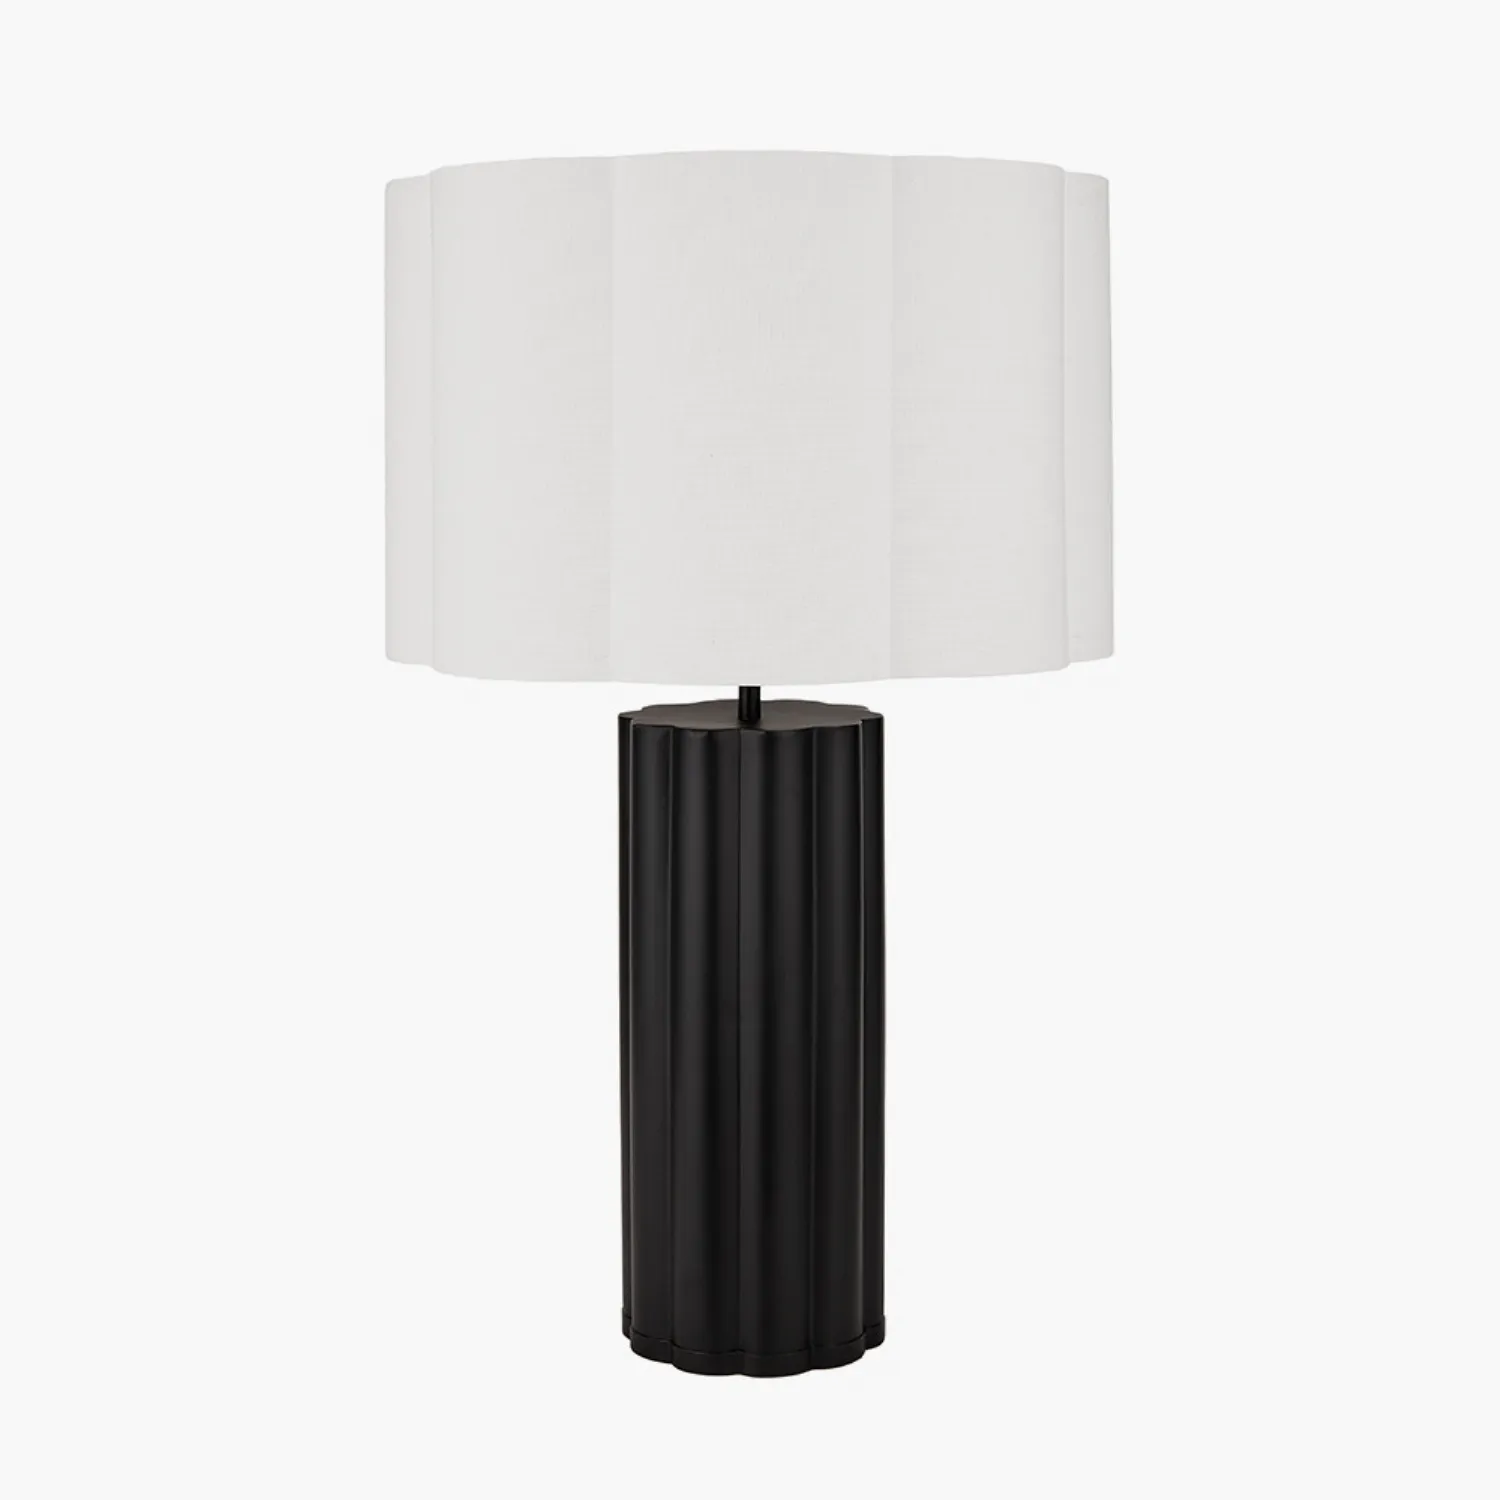 Black Metal Scalloped Table Lamp with White Handloom Shade